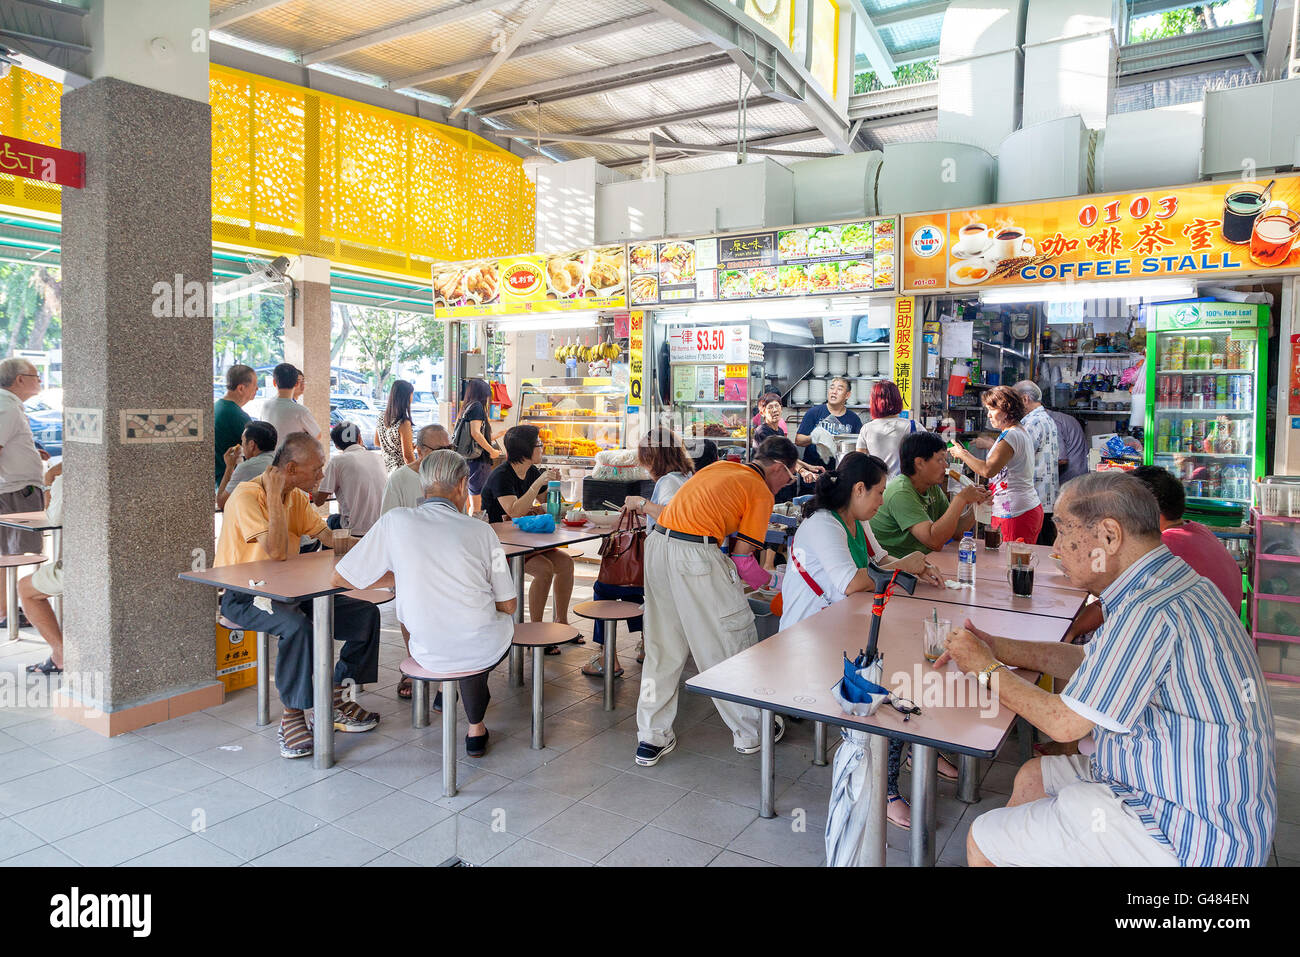 Singapore, Singapore - December 11, 2014: Diners eat at the popular food stalls in Whampoa Hawker Center in Singapore. Stock Photo